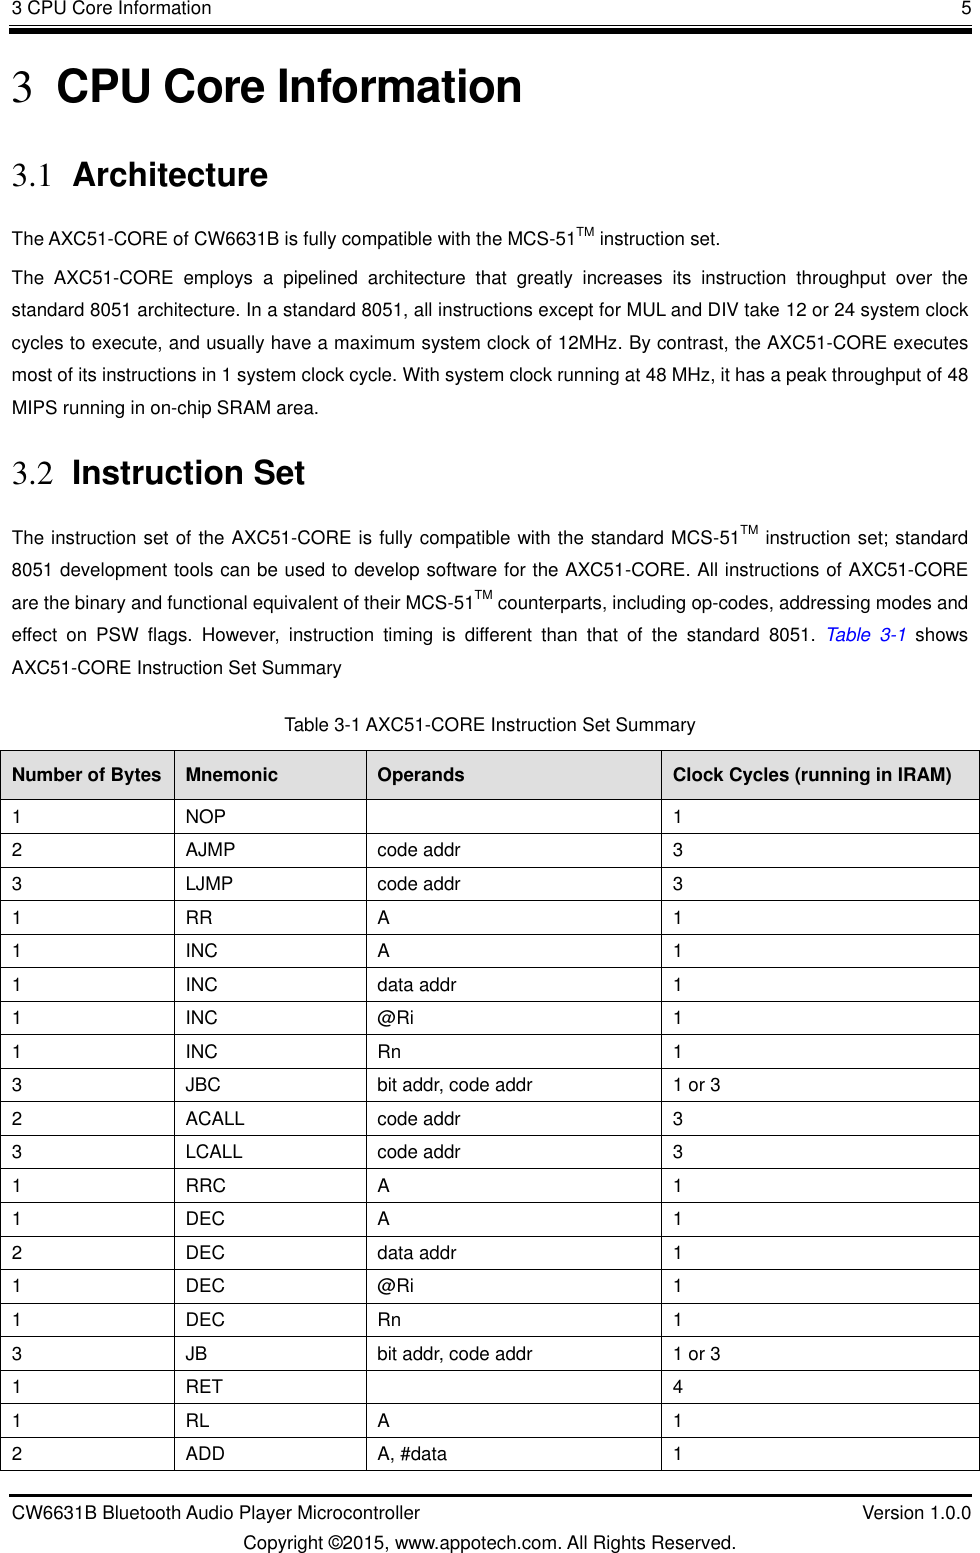 3 CPU Core Information       5 CW6631B Bluetooth Audio Player Microcontroller    Version 1.0.0 Copyright ©2015, www.appotech.com. All Rights Reserved. 3 CPU Core Information 3.1 Architecture The AXC51-CORE of CW6631B is fully compatible with the MCS-51TM instruction set. The  AXC51-CORE  employs  a  pipelined  architecture  that  greatly  increases  its  instruction  throughput  over  the standard 8051 architecture. In a standard 8051, all instructions except for MUL and DIV take 12 or 24 system clock cycles to execute, and usually have a maximum system clock of 12MHz. By contrast, the AXC51-CORE executes most of its instructions in 1 system clock cycle. With system clock running at 48 MHz, it has a peak throughput of 48 MIPS running in on-chip SRAM area. 3.2 Instruction Set The instruction set of the AXC51-CORE is fully compatible with the standard MCS-51TM instruction set; standard 8051 development tools can be used to develop software for the AXC51-CORE. All instructions of AXC51-CORE are the binary and functional equivalent of their MCS-51TM counterparts, including op-codes, addressing modes and effect  on  PSW  flags.  However,  instruction  timing  is  different  than  that  of  the  standard  8051. Table  3-1  shows AXC51-CORE Instruction Set Summary Table 3-1 AXC51-CORE Instruction Set Summary Number of Bytes Mnemonic Operands Clock Cycles (running in IRAM) 1  NOP    1 2  AJMP  code addr  3 3  LJMP  code addr  3 1  RR  A  1 1  INC  A  1 1  INC  data addr  1 1  INC  @Ri  1 1  INC  Rn  1 3  JBC  bit addr, code addr  1 or 3 2  ACALL  code addr  3 3  LCALL  code addr  3 1  RRC  A  1 1  DEC  A  1 2  DEC  data addr  1 1  DEC  @Ri  1 1  DEC  Rn  1 3  JB  bit addr, code addr  1 or 3 1  RET    4 1  RL  A  1 2  ADD  A, #data  1 